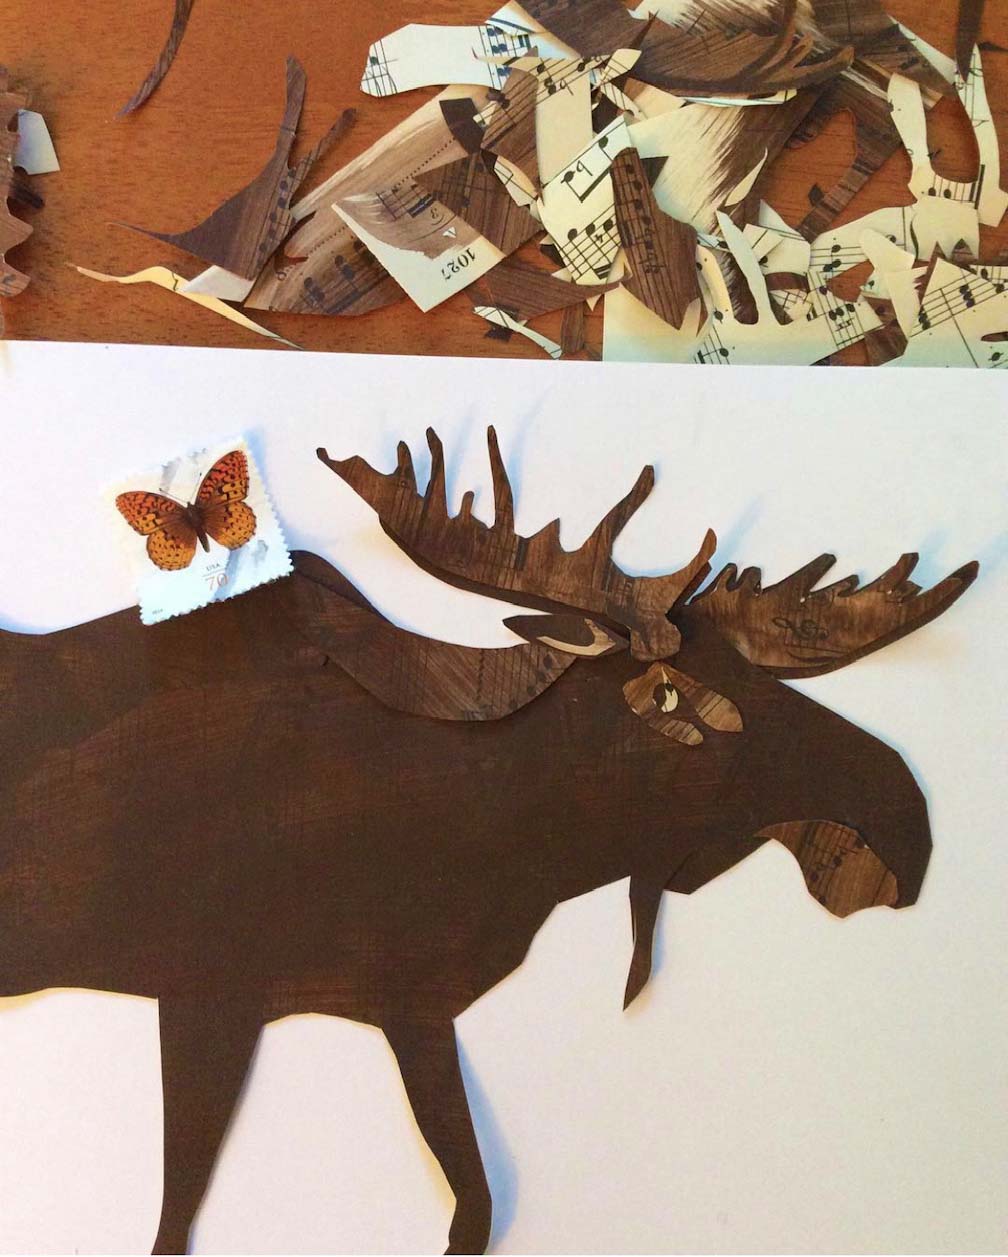 Moose collage with butterfly stamp